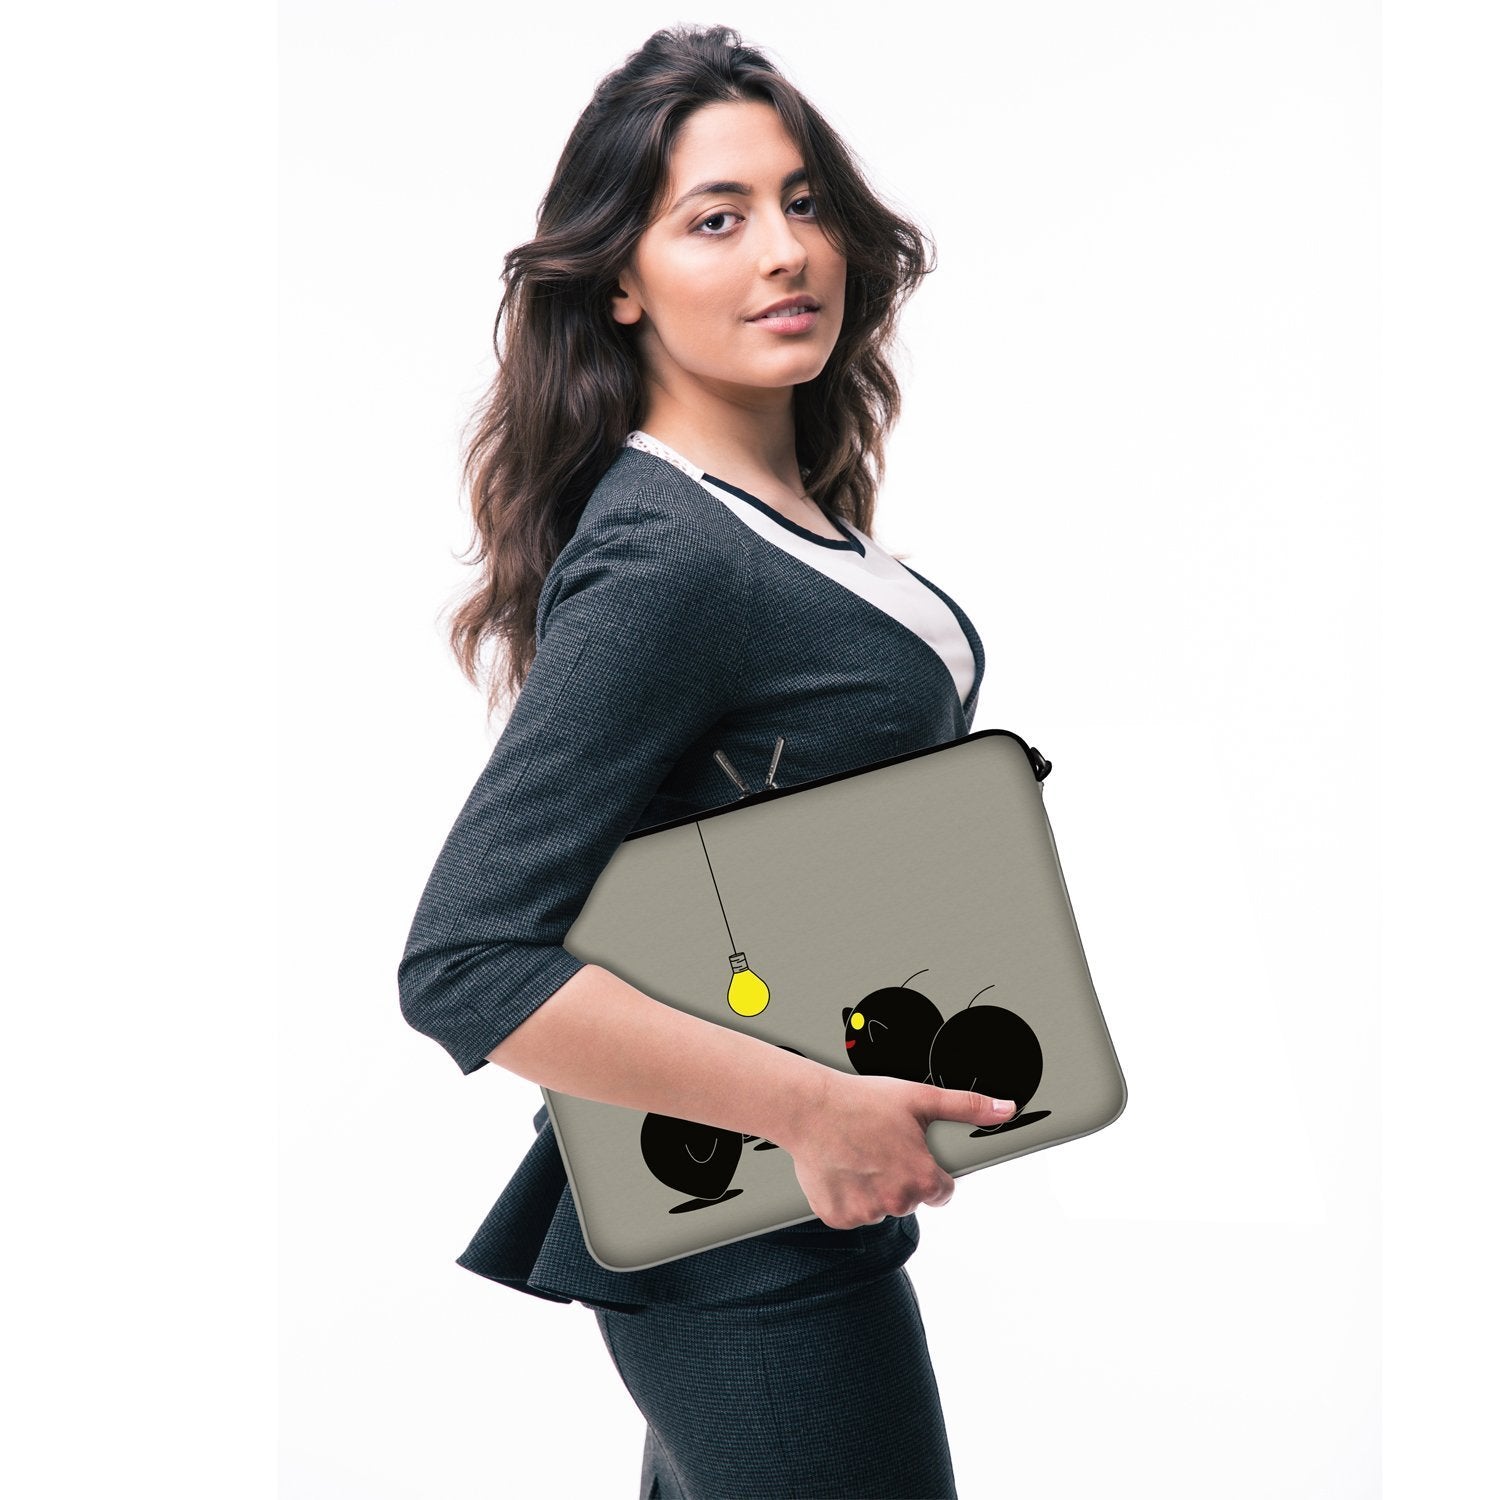 15"- 15.6" (inch) LAPTOP SLEEVE CARRY CASE/BAG NEOPRENE FOR LAPTOPS/NOTEBOOKS, ZIPPED *Pink Nails*